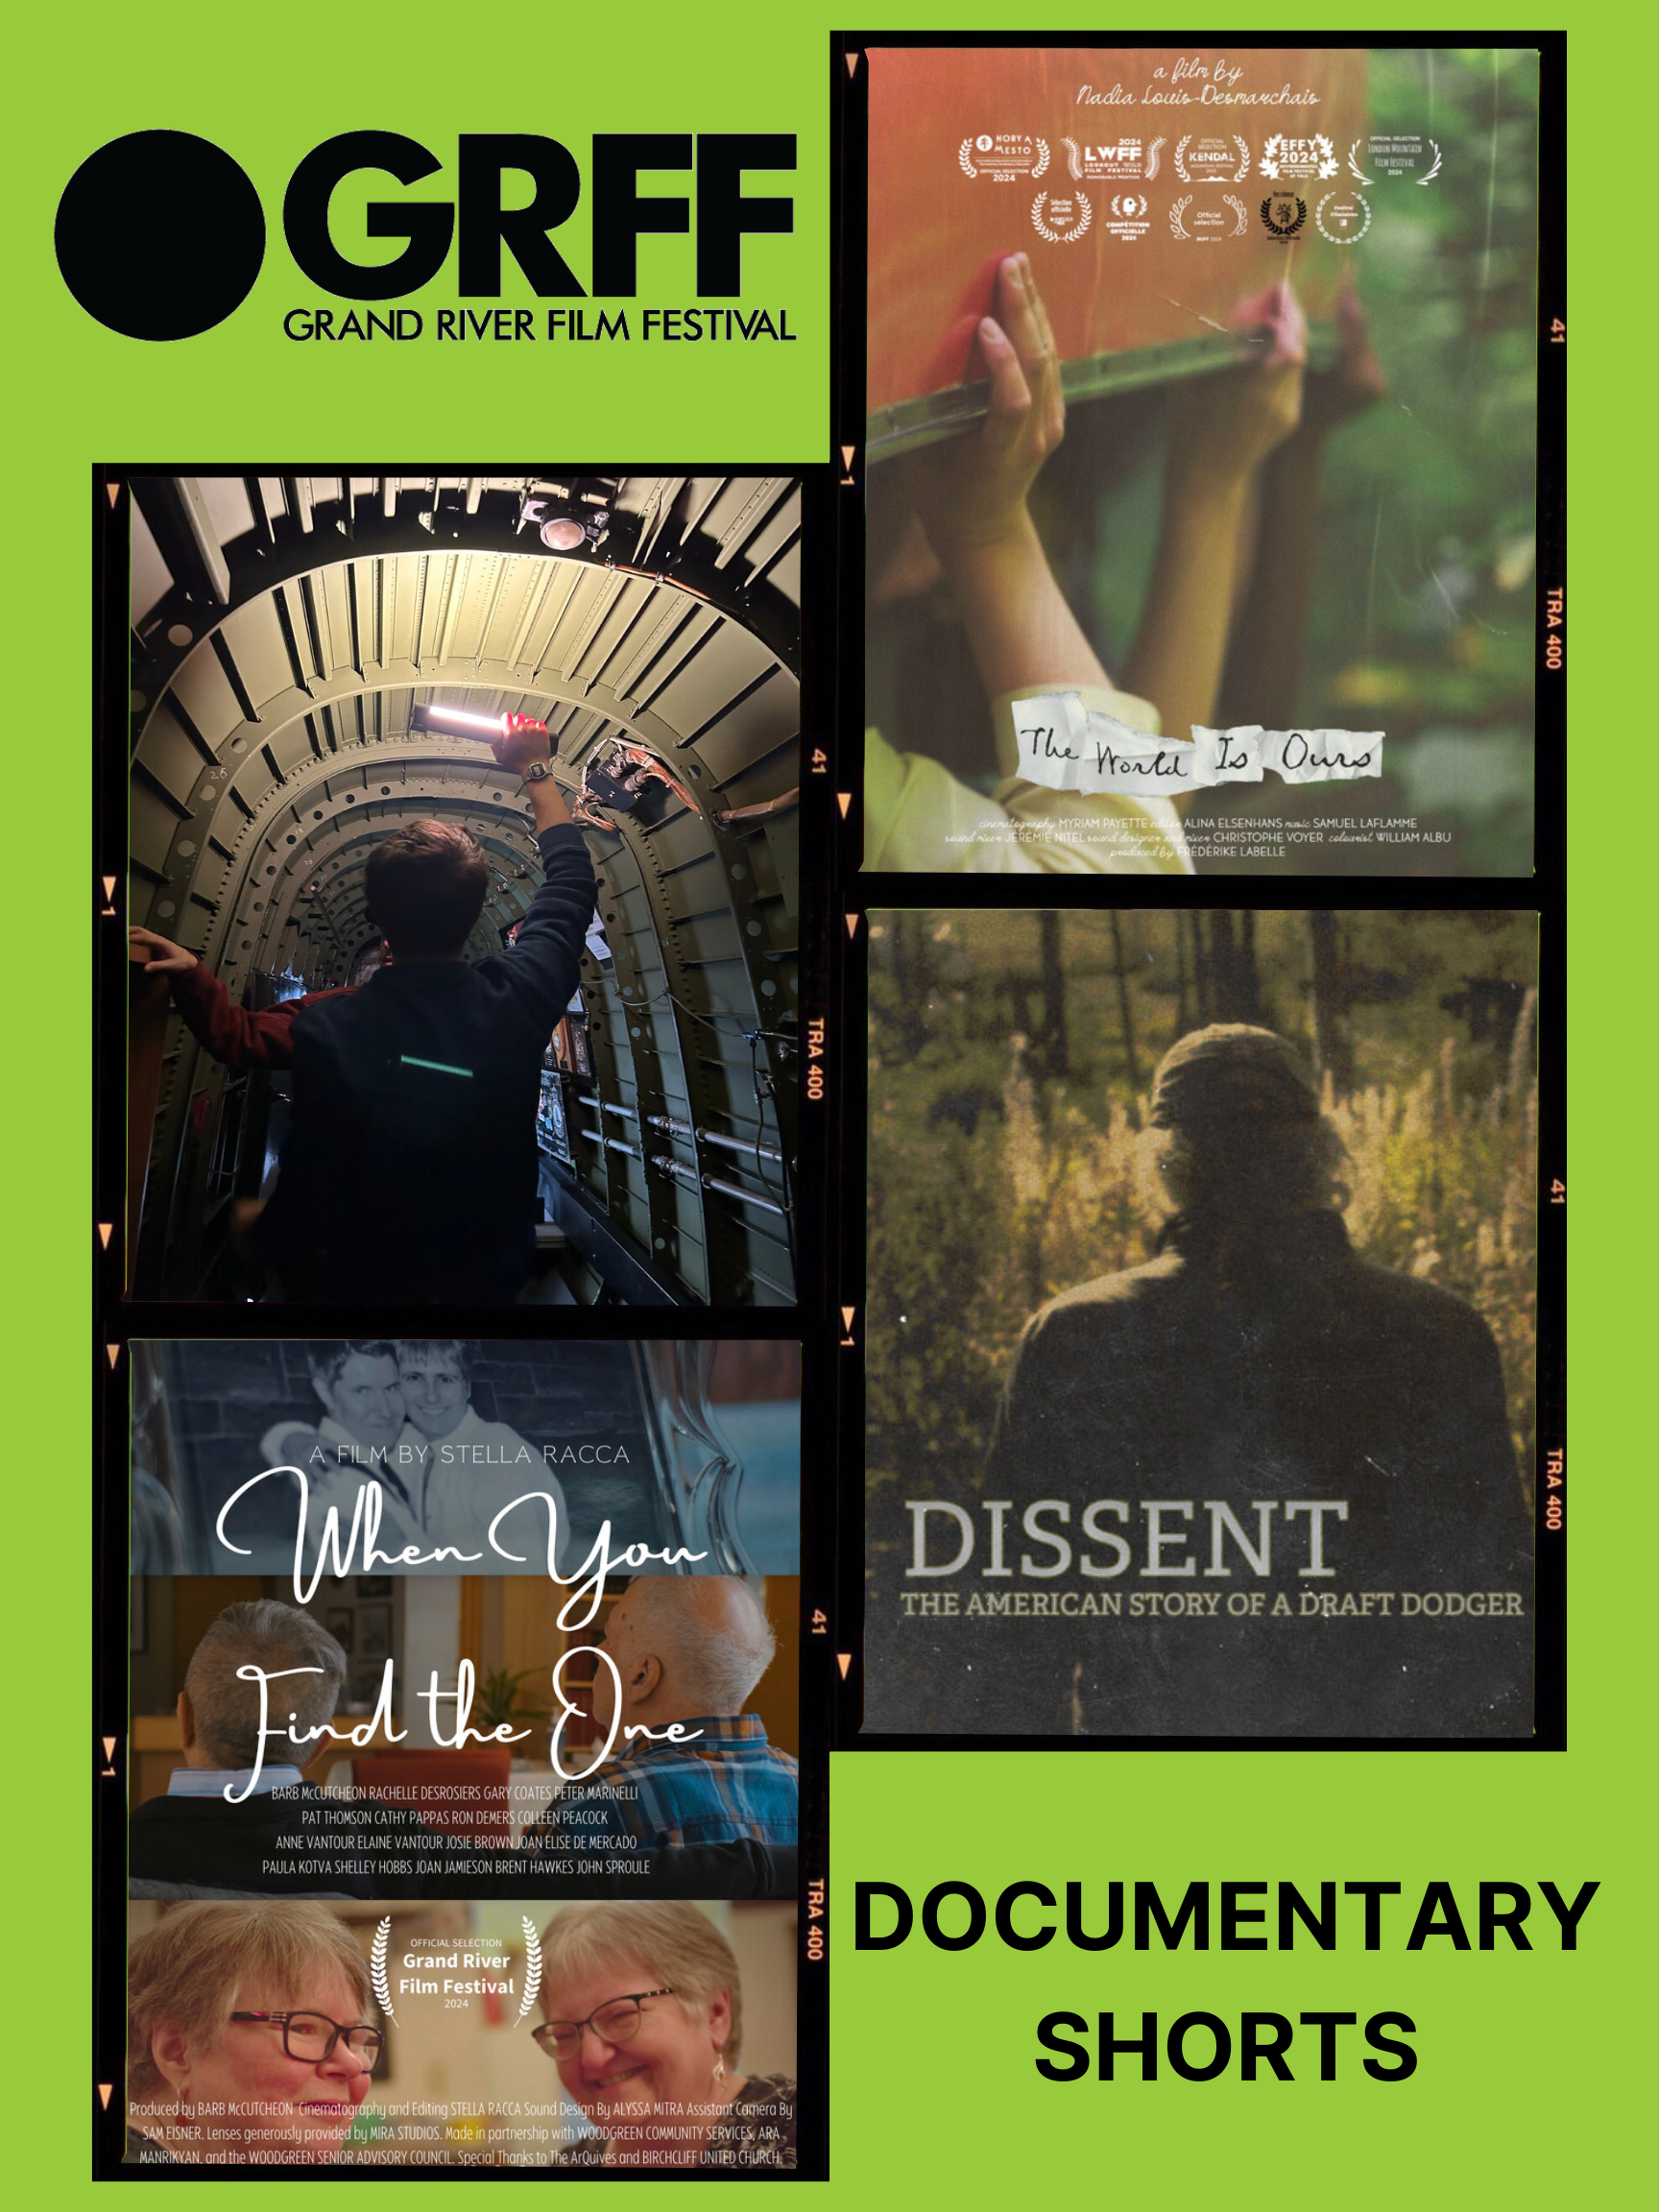 Four small posters of shorts shown as part of the program.